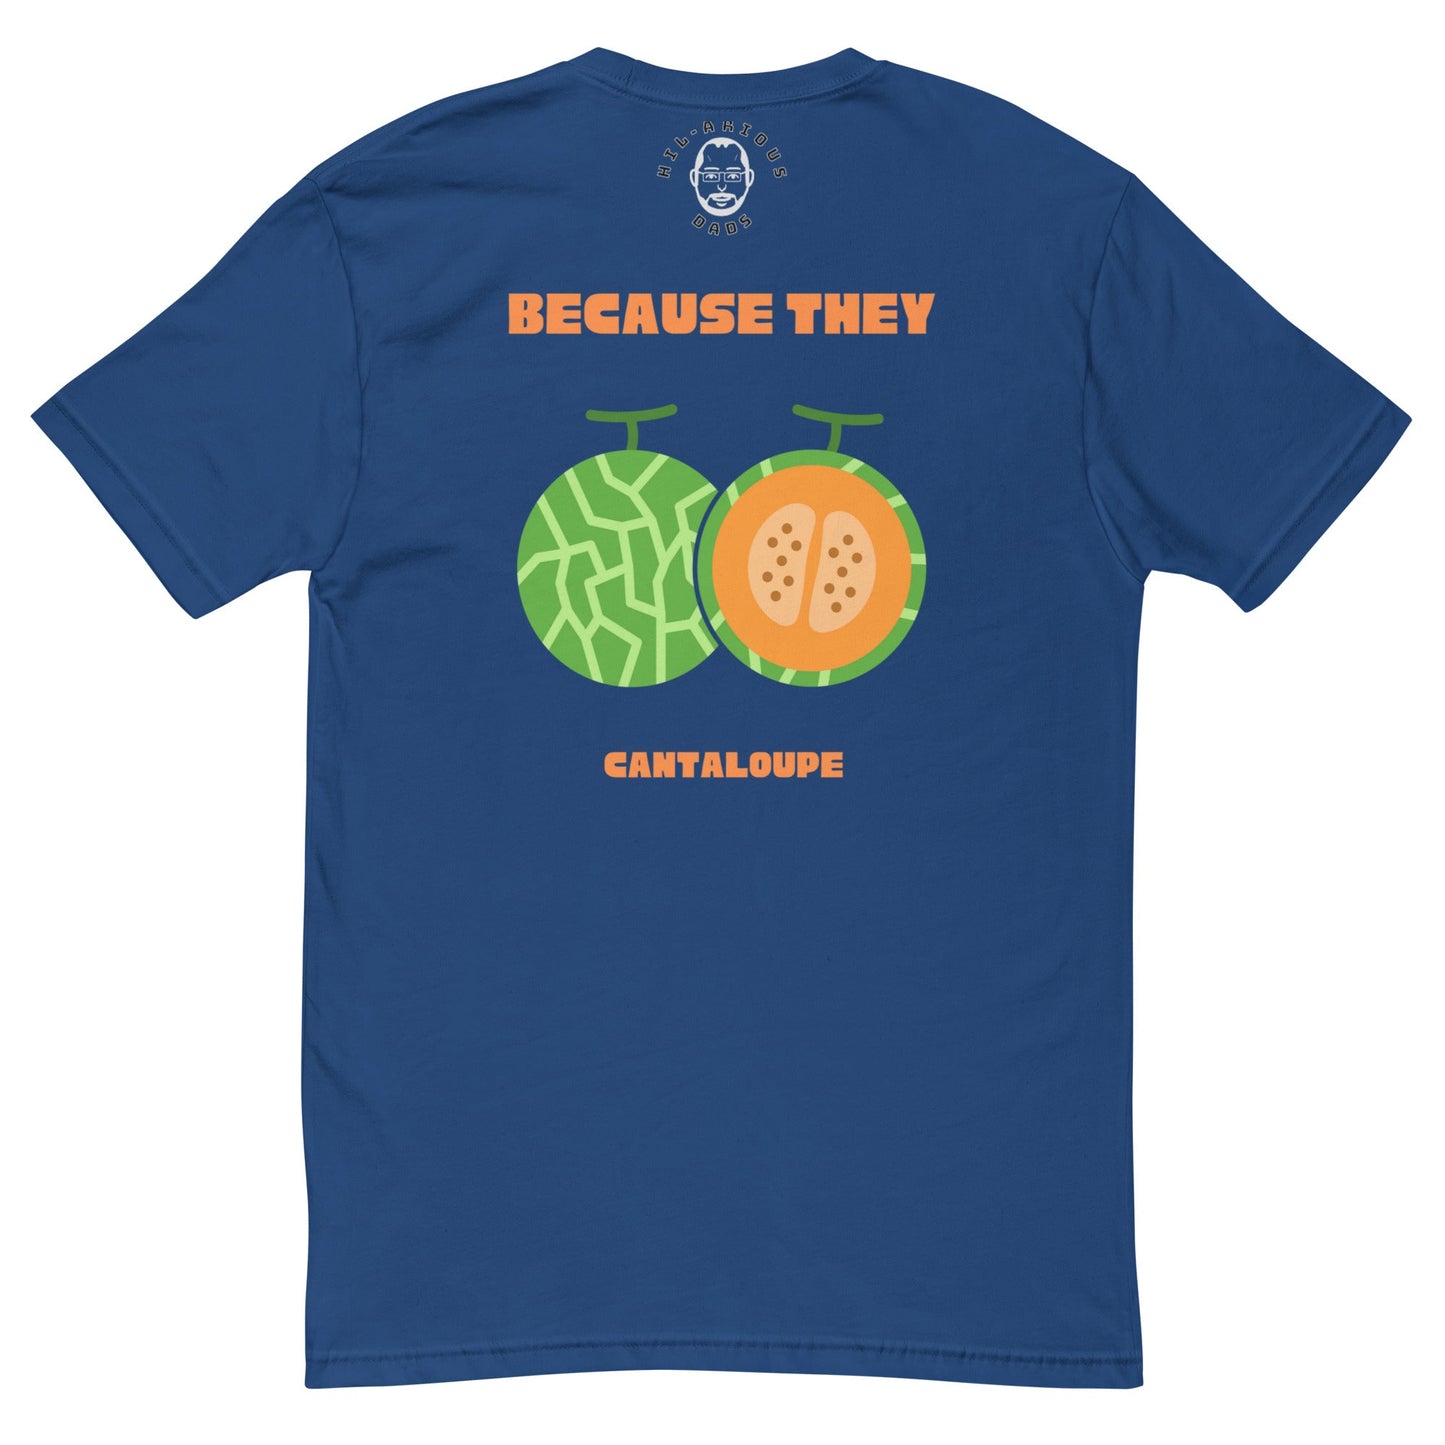 Why didn’t the melons get married?-T-shirt - Hil-arious Dads